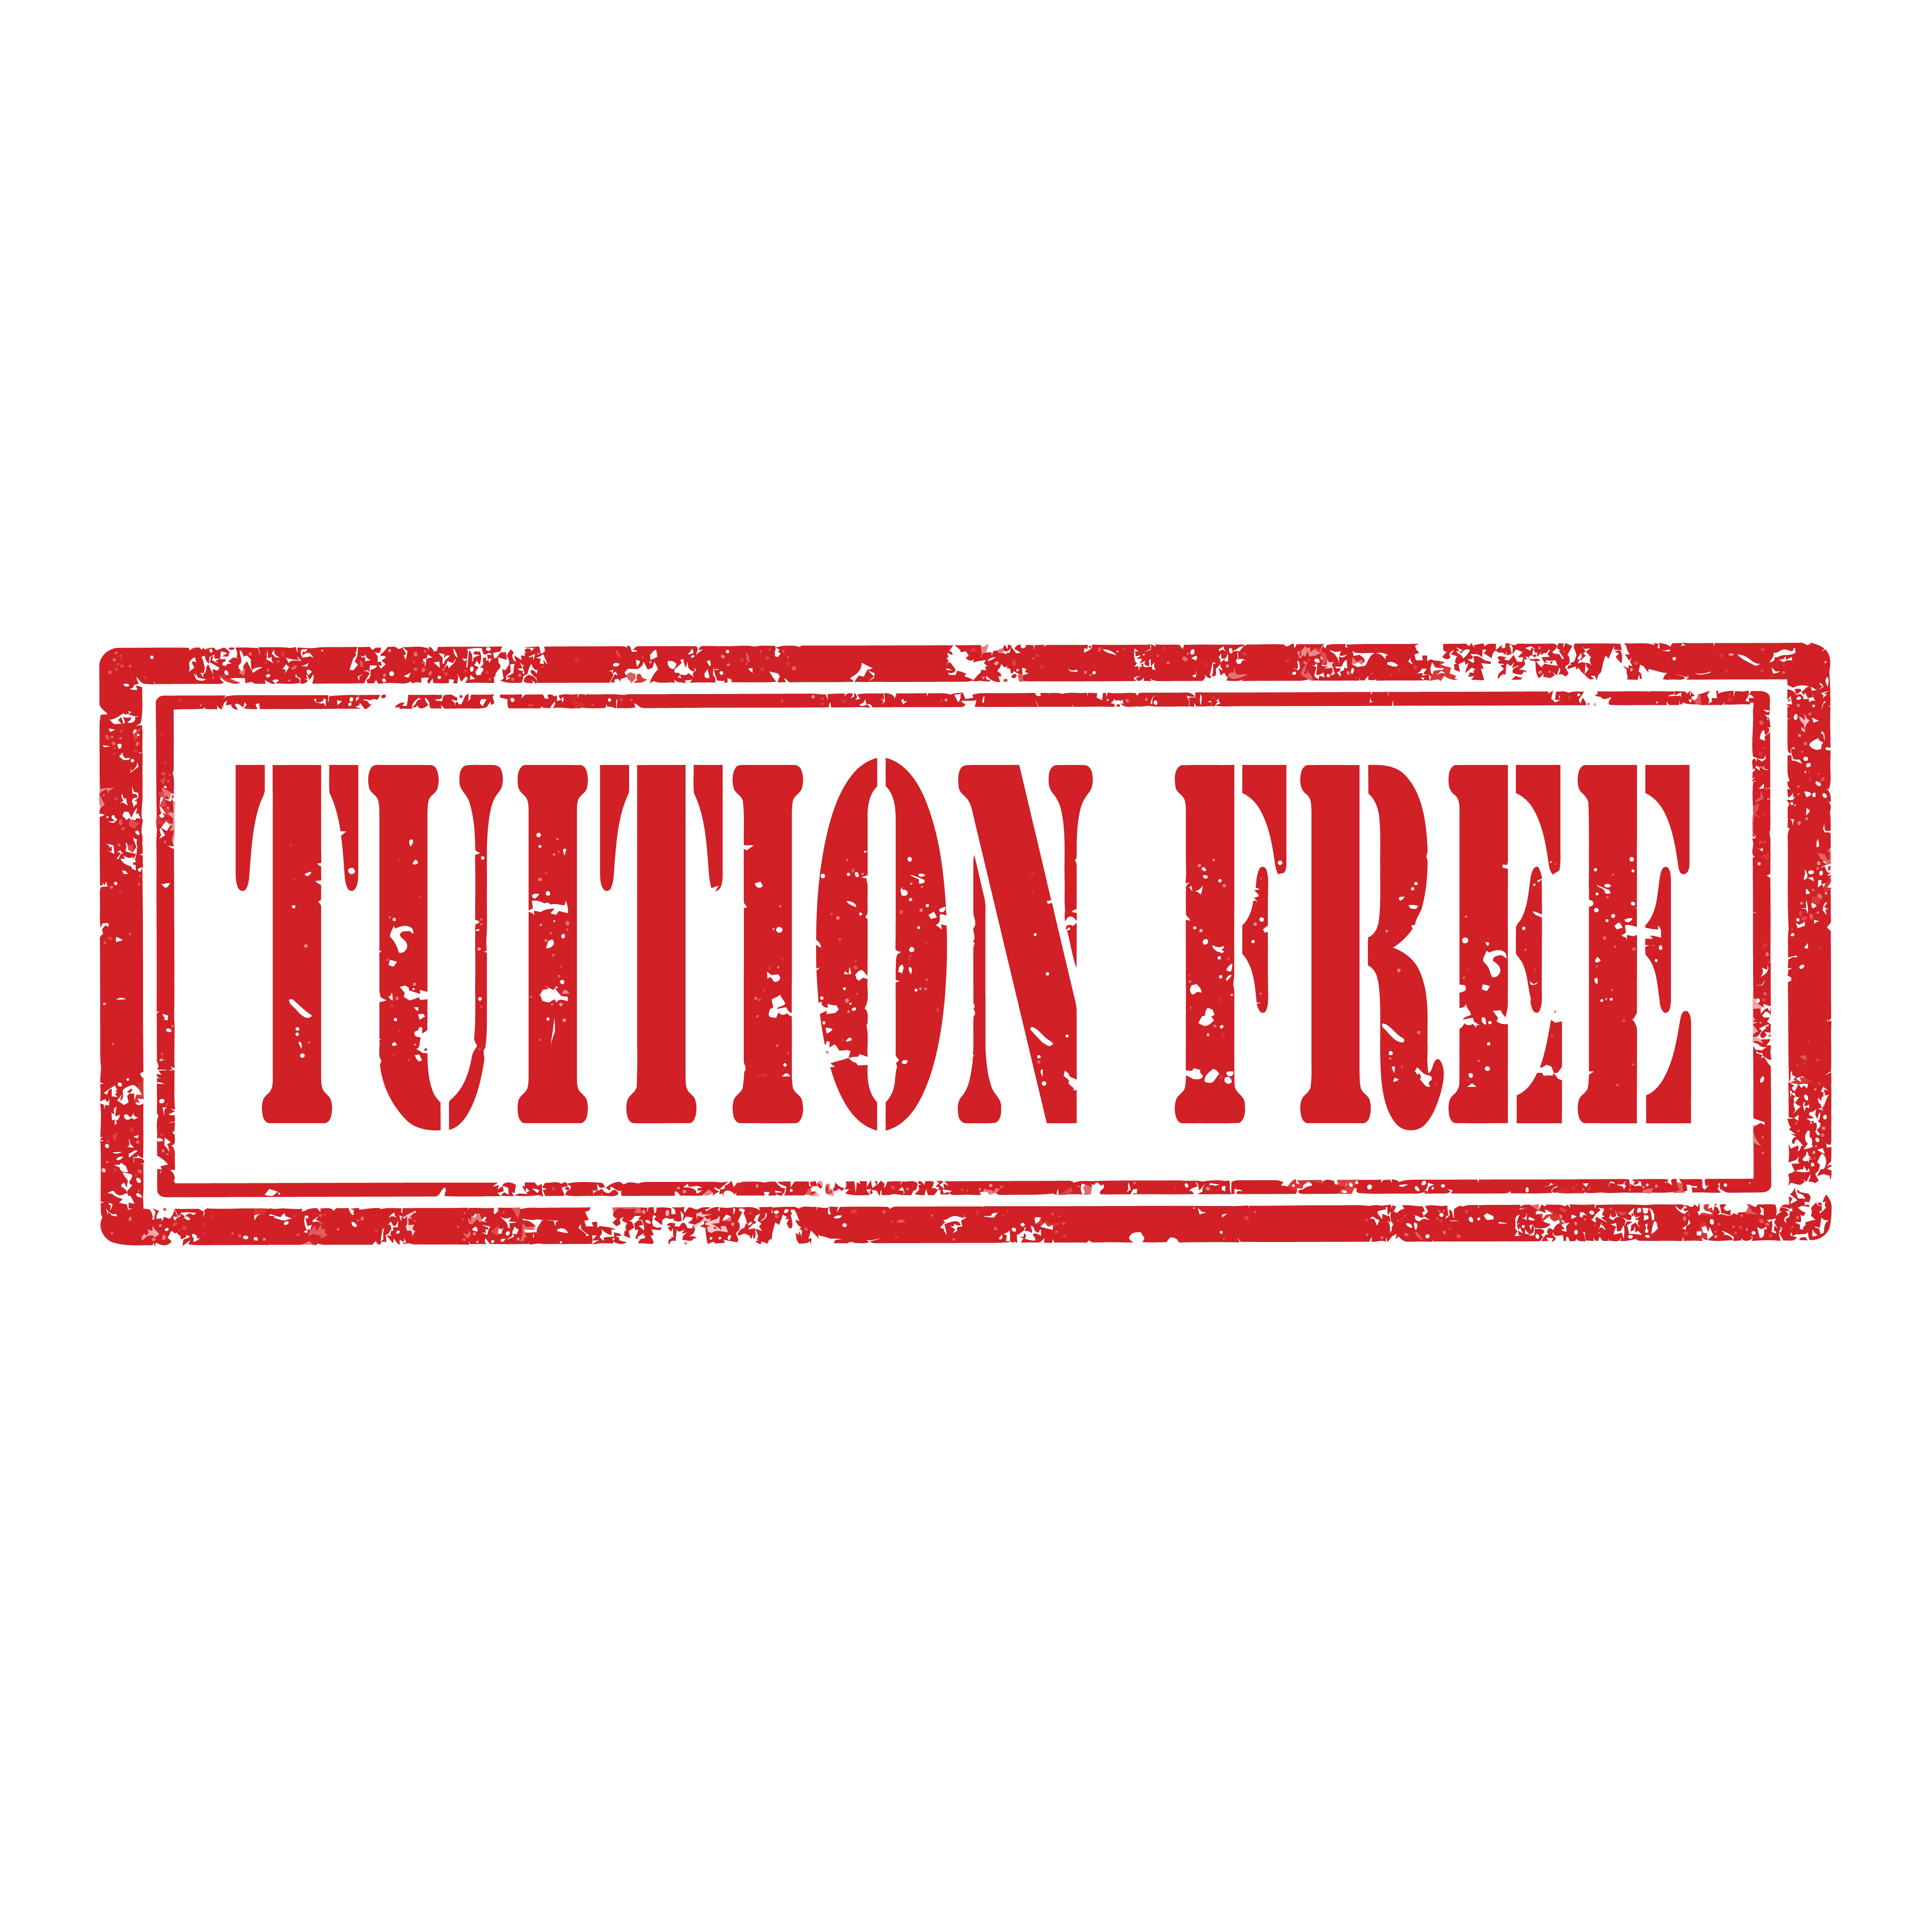 Tuition UiT